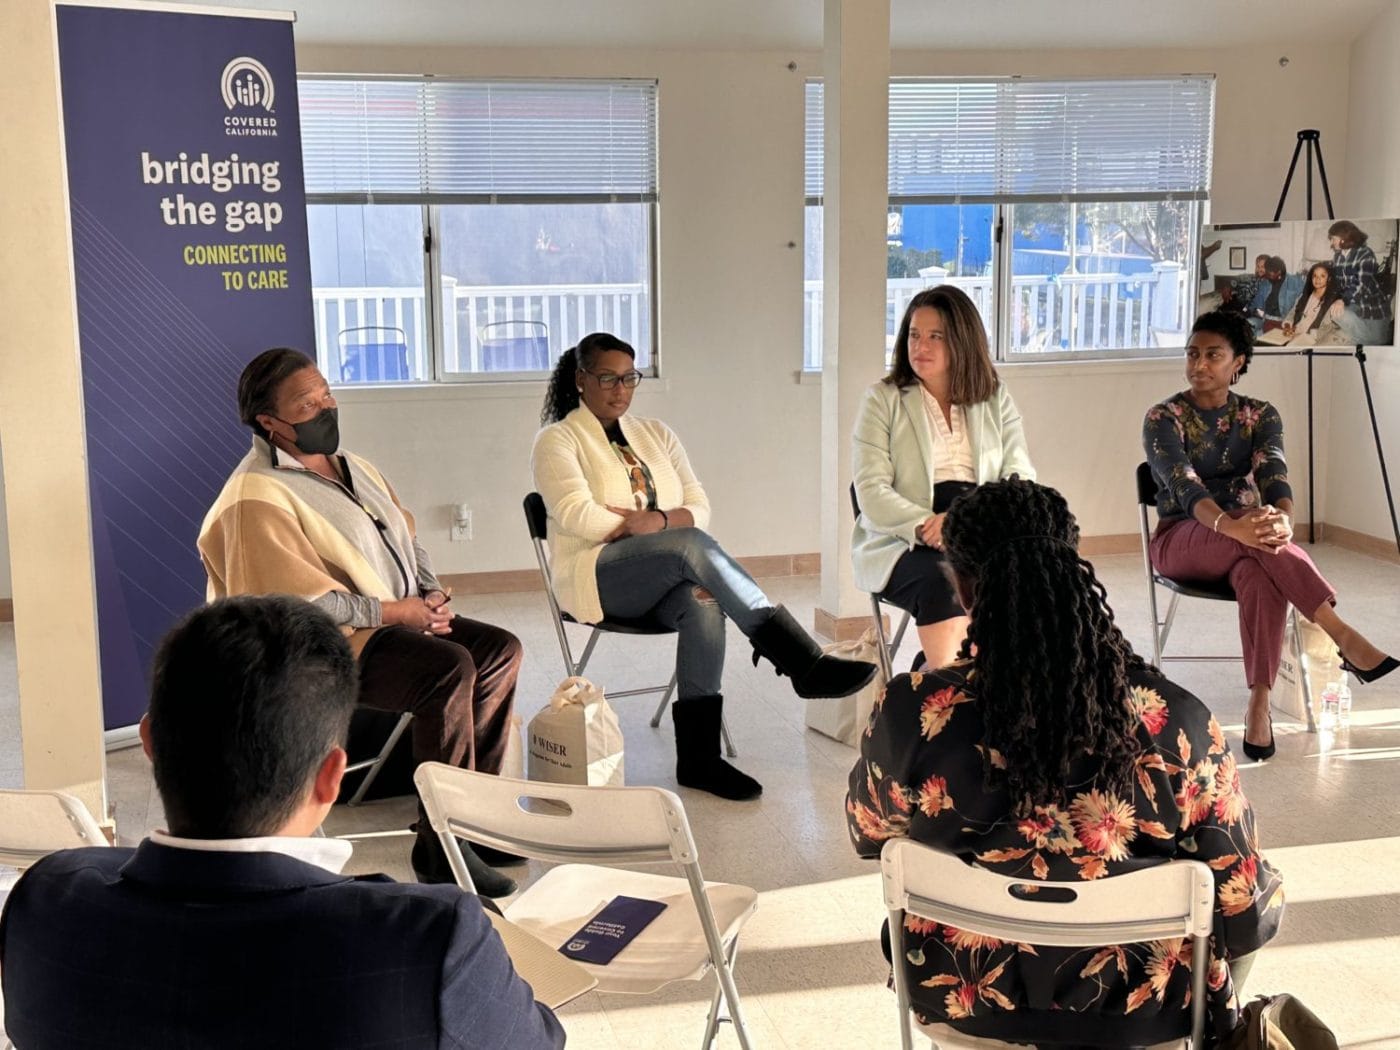 Health-equity-panel-Dr.-Kimberly-Rhoads-Dr.-Misty-Patton-Jessica-Altman-Dr.-Monica-Soni-Oakland-120823-by-Kevin-Epps-1400x1050, Troublemakers and system changers, healthcare that works for you, Culture Currents Featured Local News & Views 